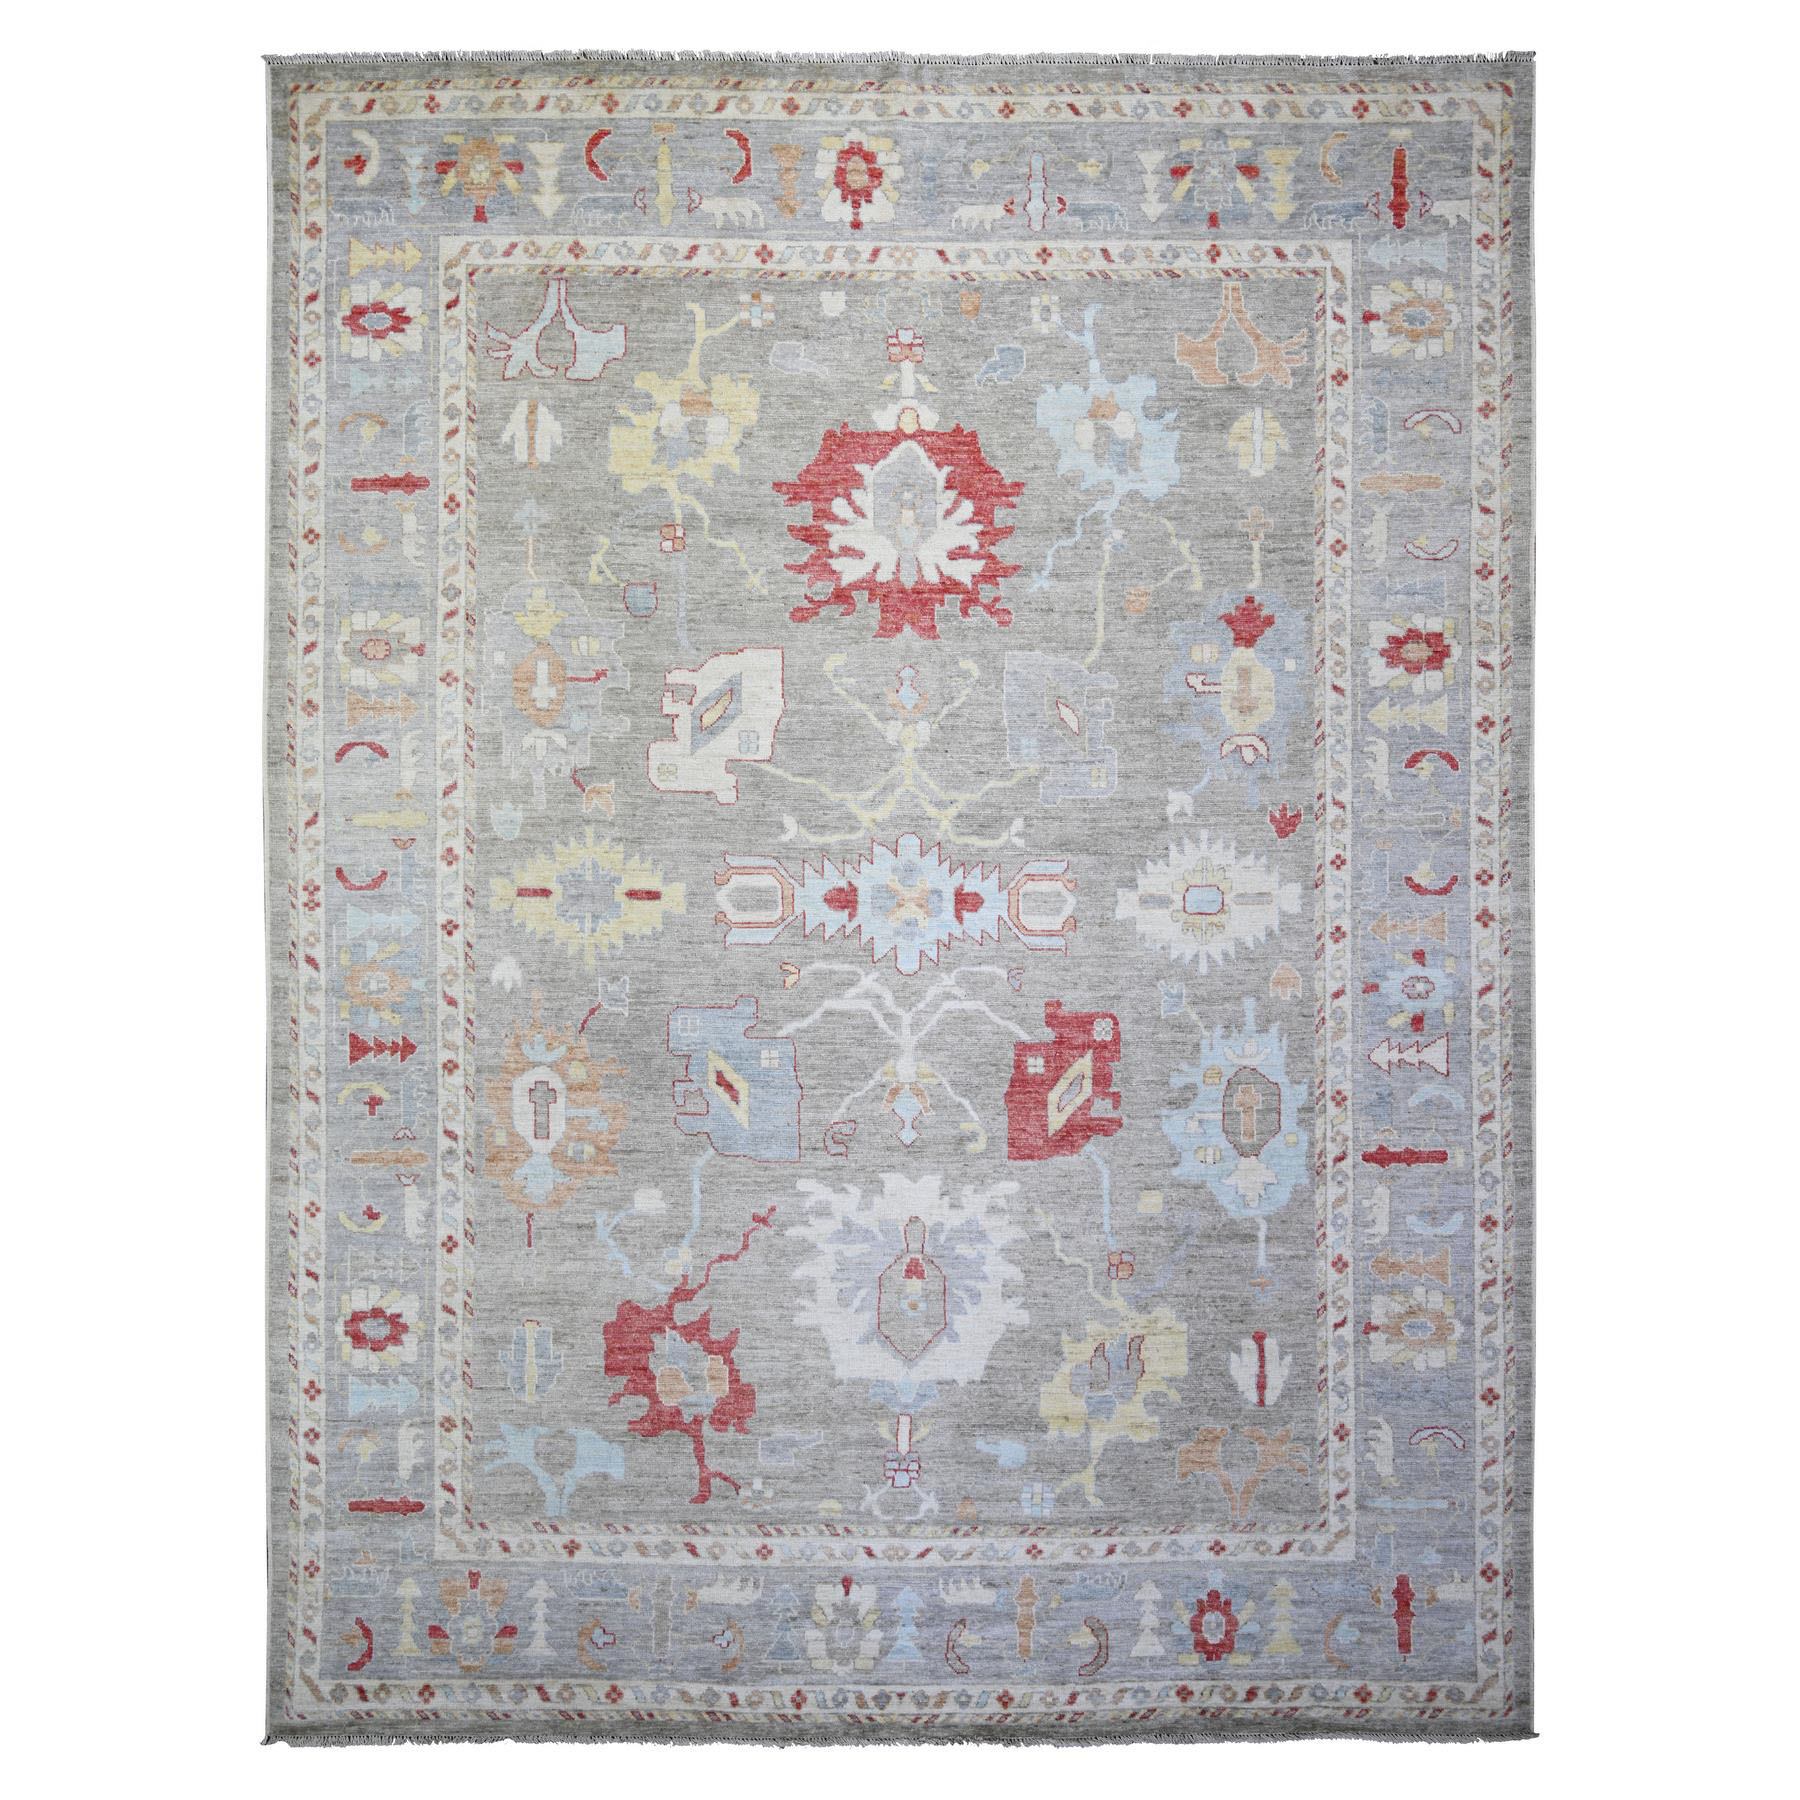 10'x13'3" Cloud Gray, Hand Woven Afghan Angora Oushak with Colorful Motifs, Vegetable Dyes Natural Wool, Oriental Rug 